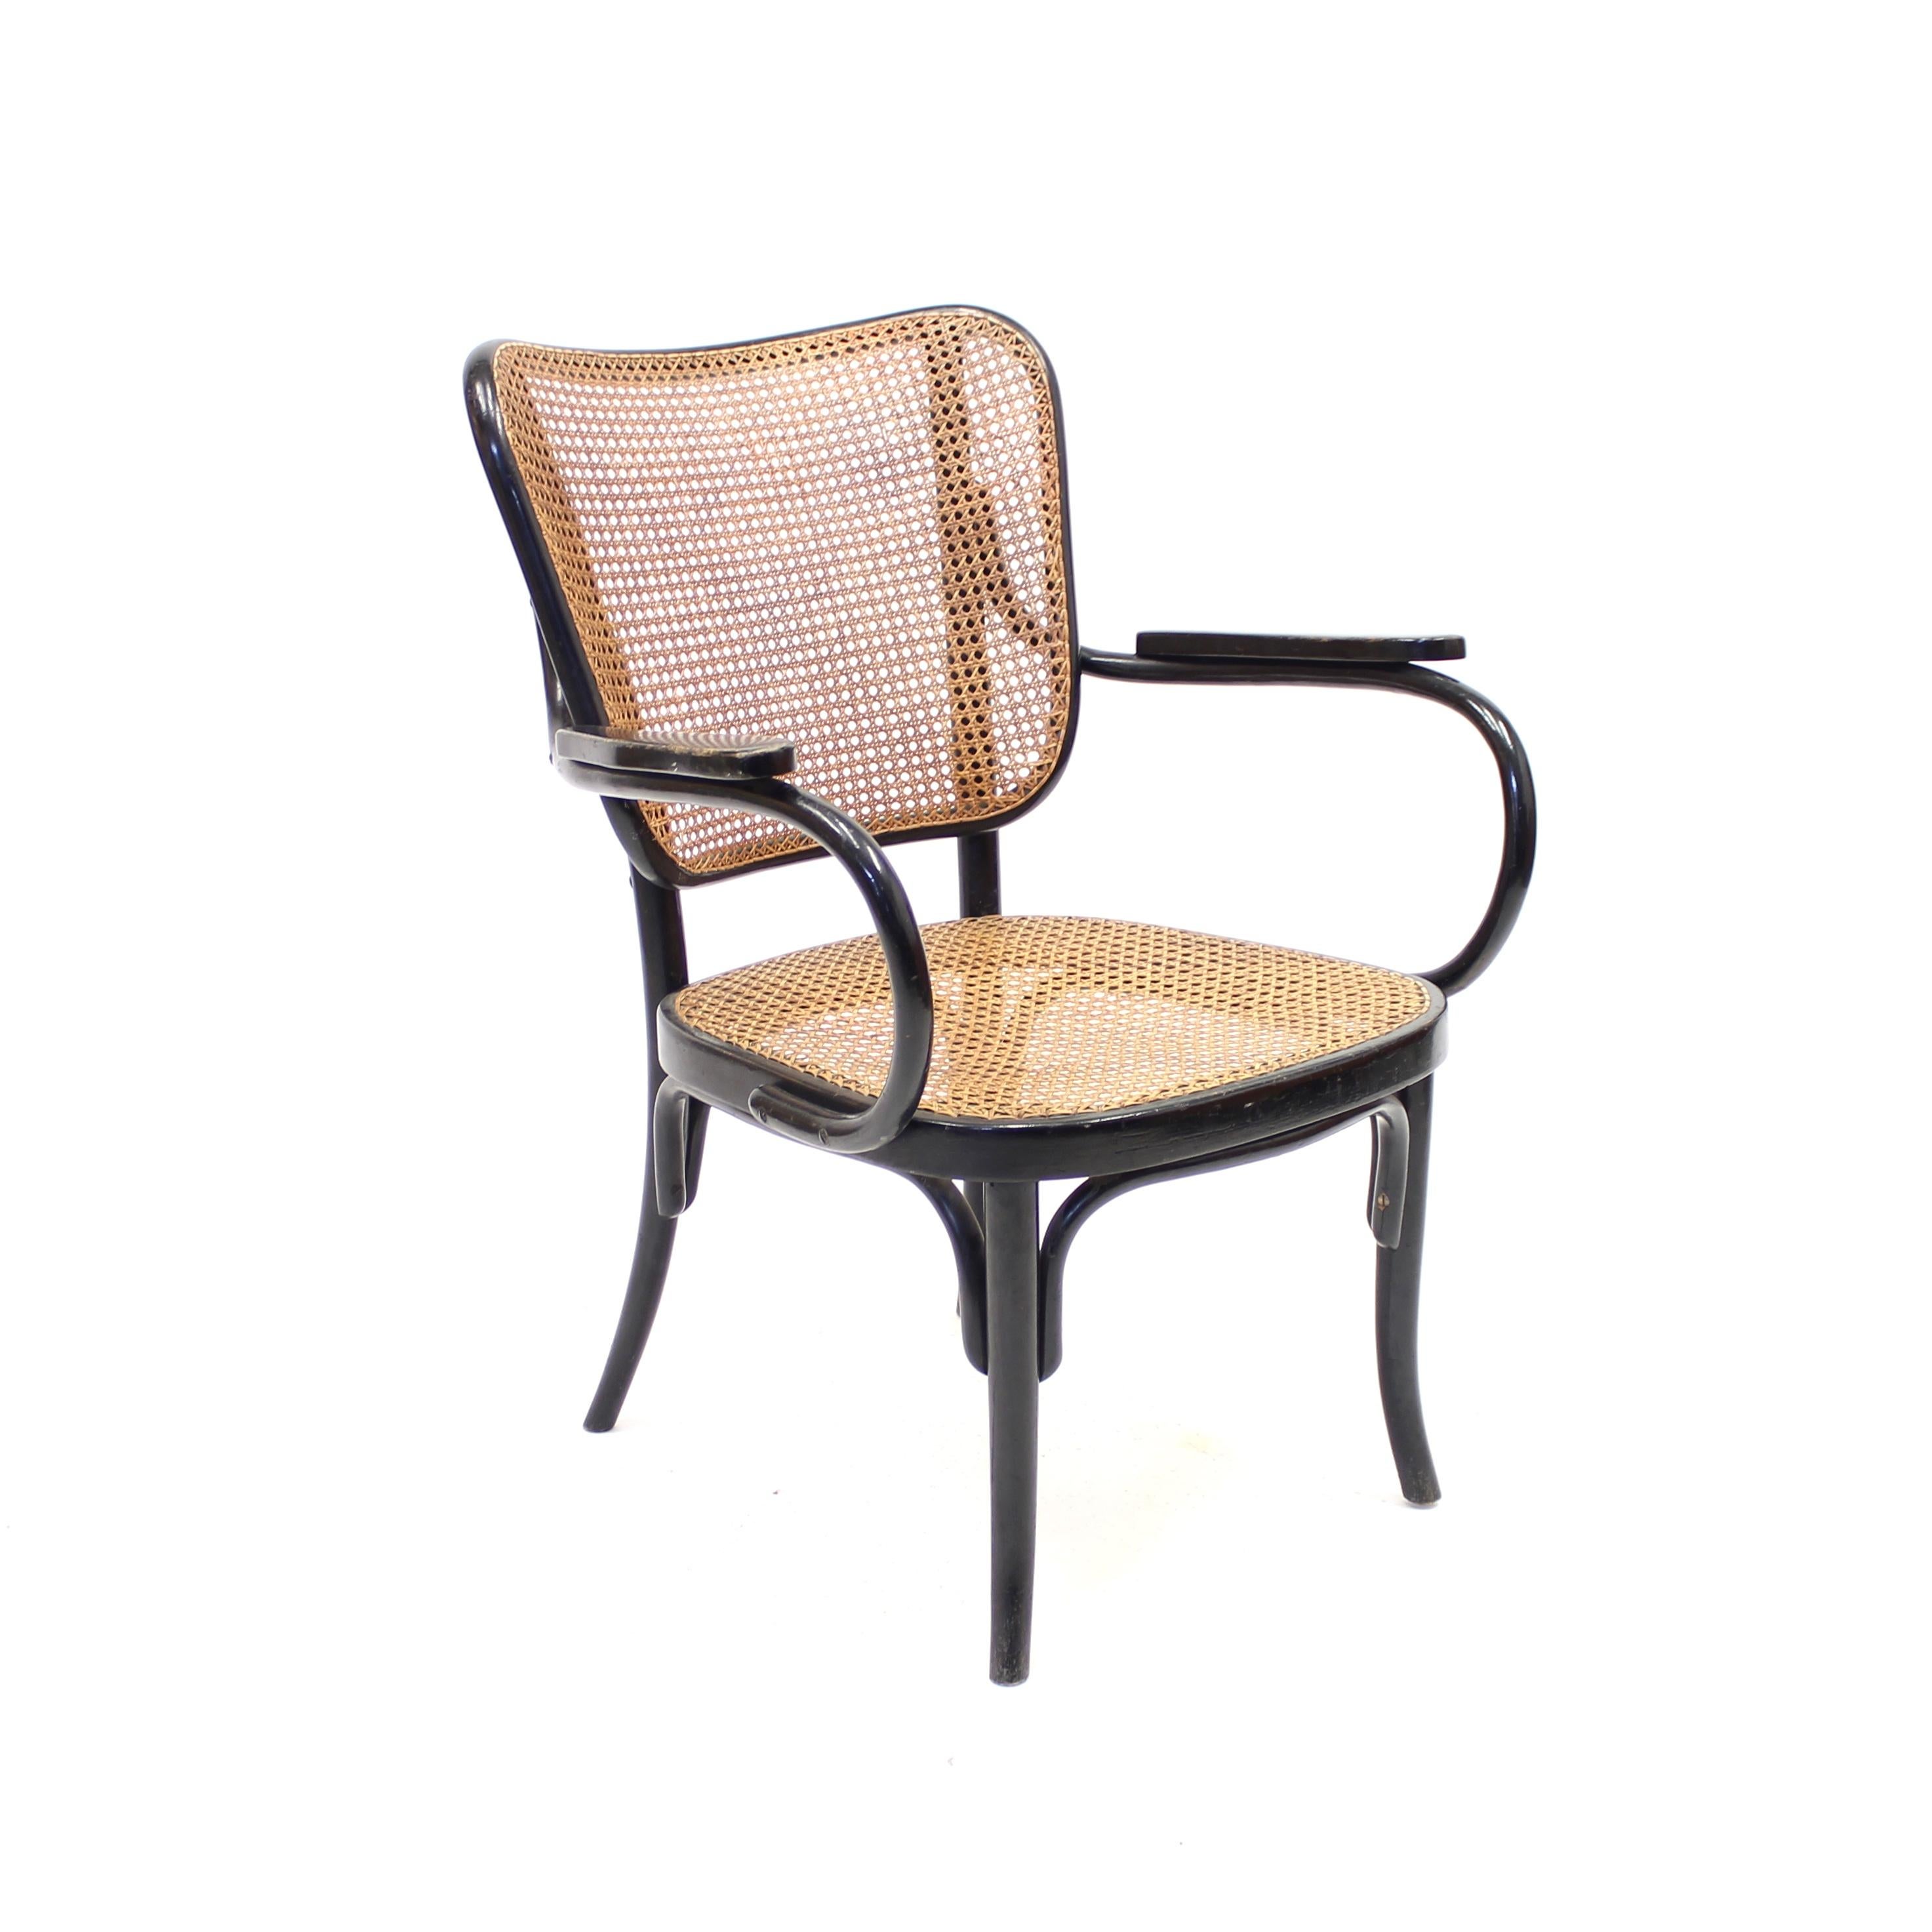 Rare armchair / lounge chair designed by Eberhard Krauss for Thonet in 1930 for the exhibition 